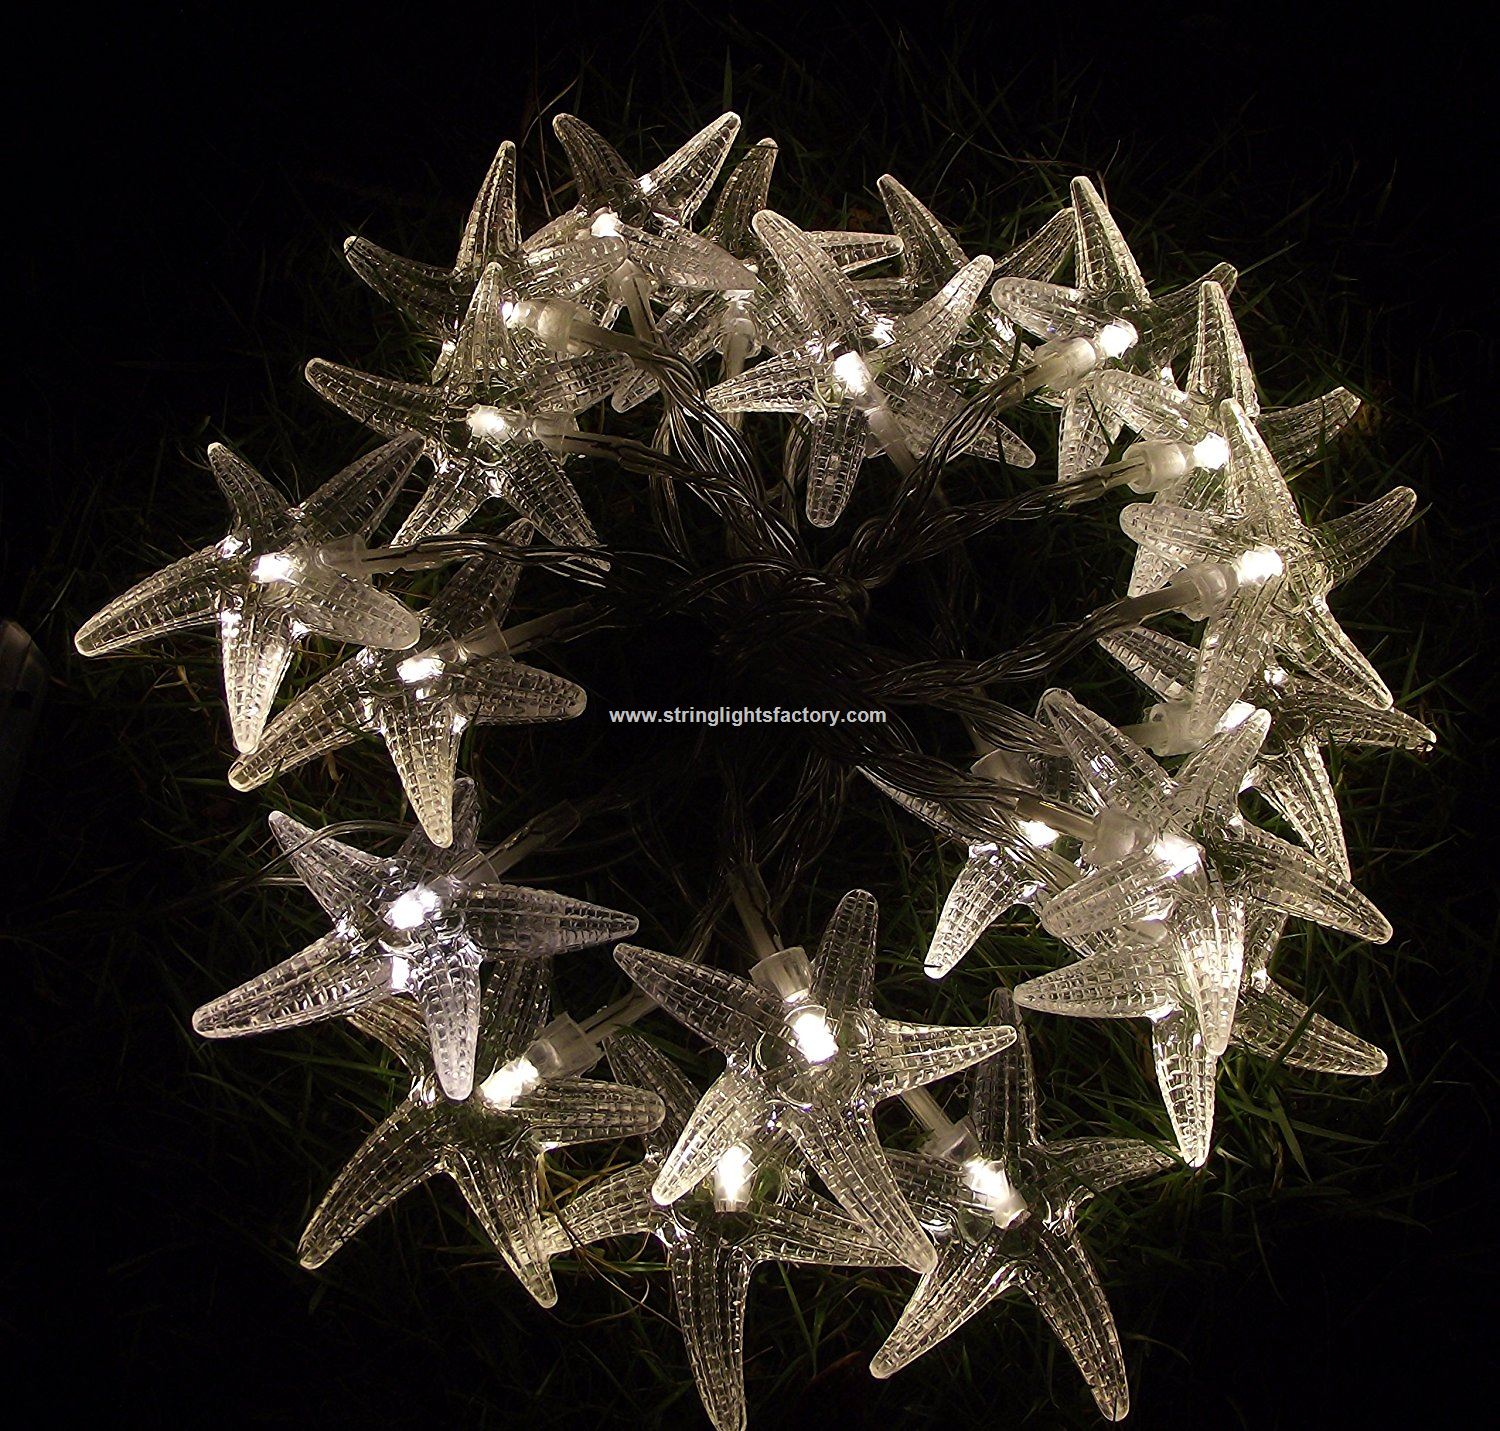 Battery Operated 20 Warm White LEDs Starfish Lights Fairy Lights